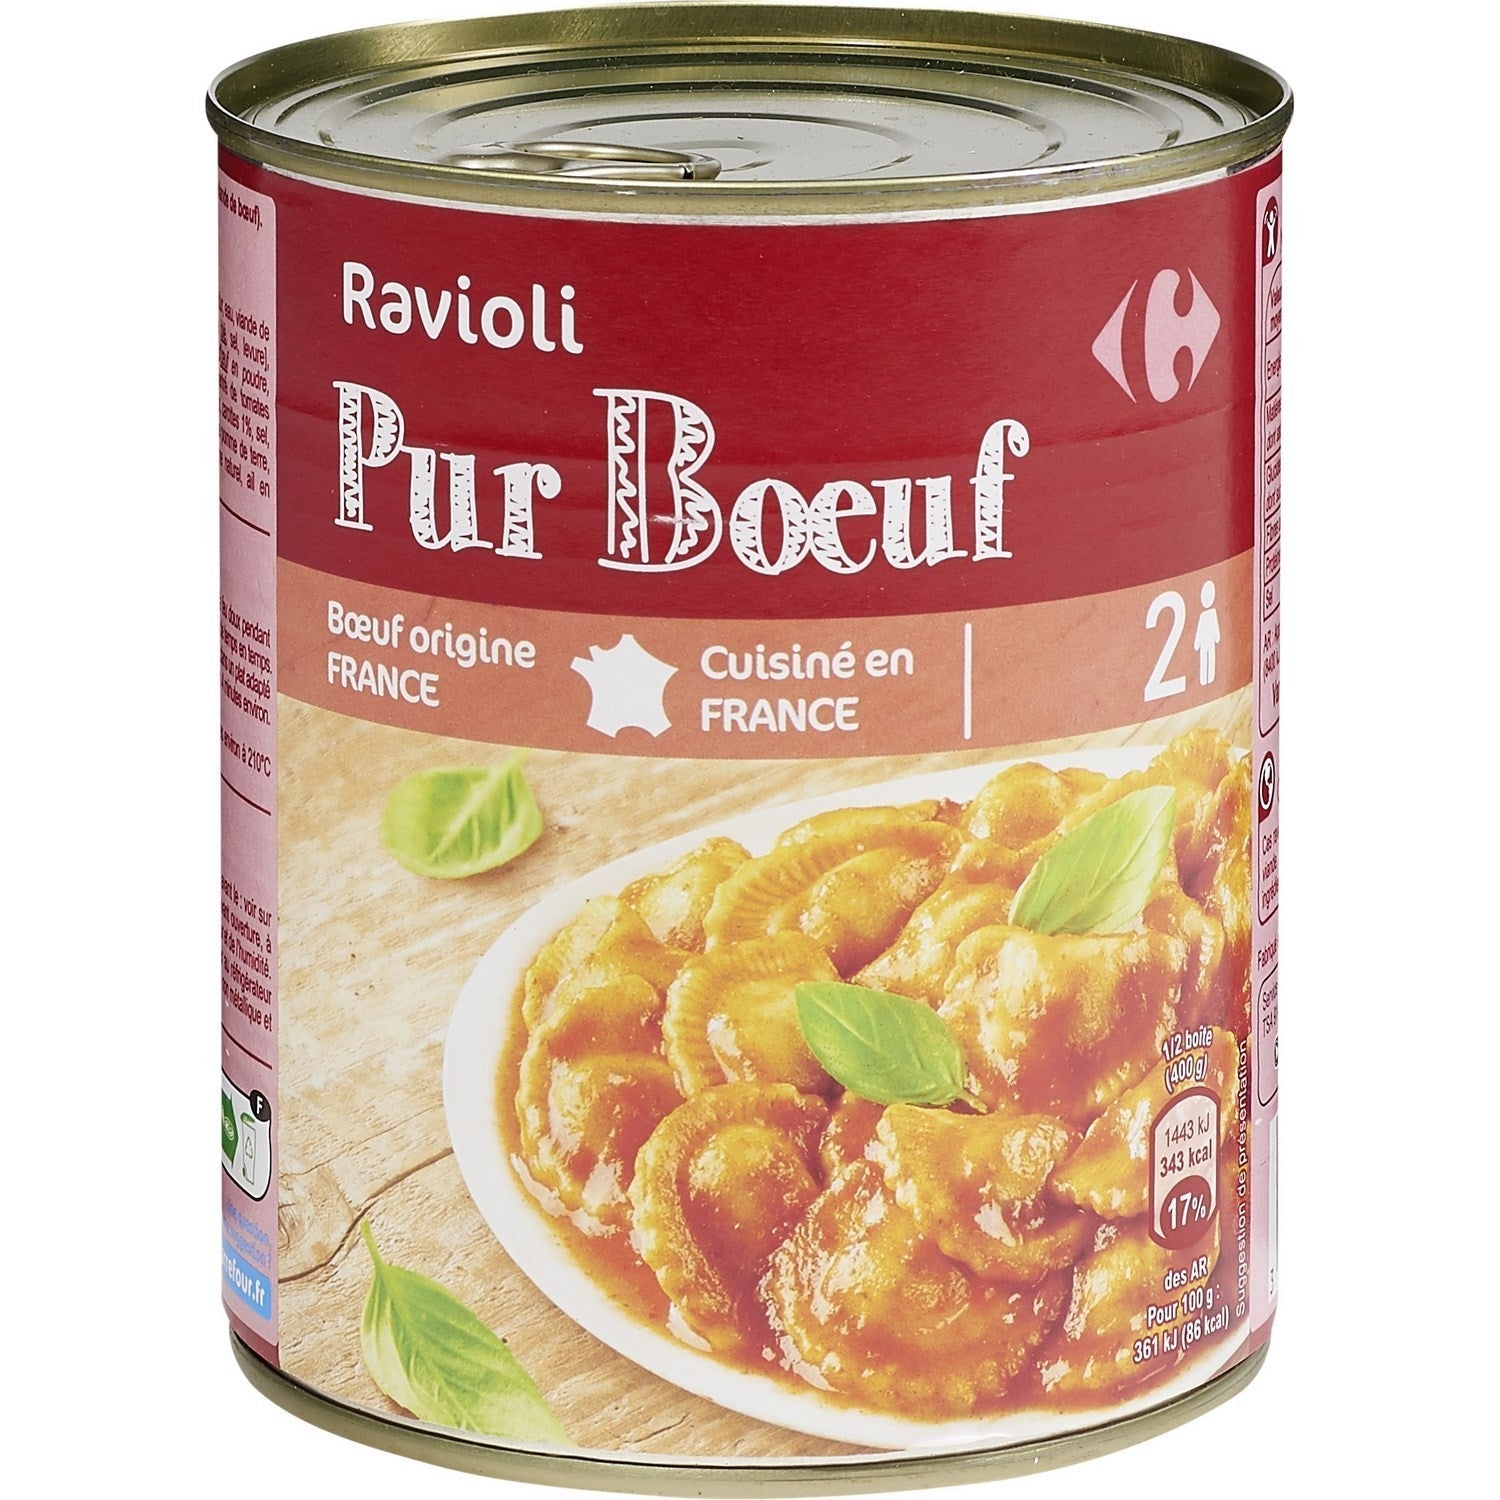 stm>Ravioli, Carrefour, 3 pers 800gr, can